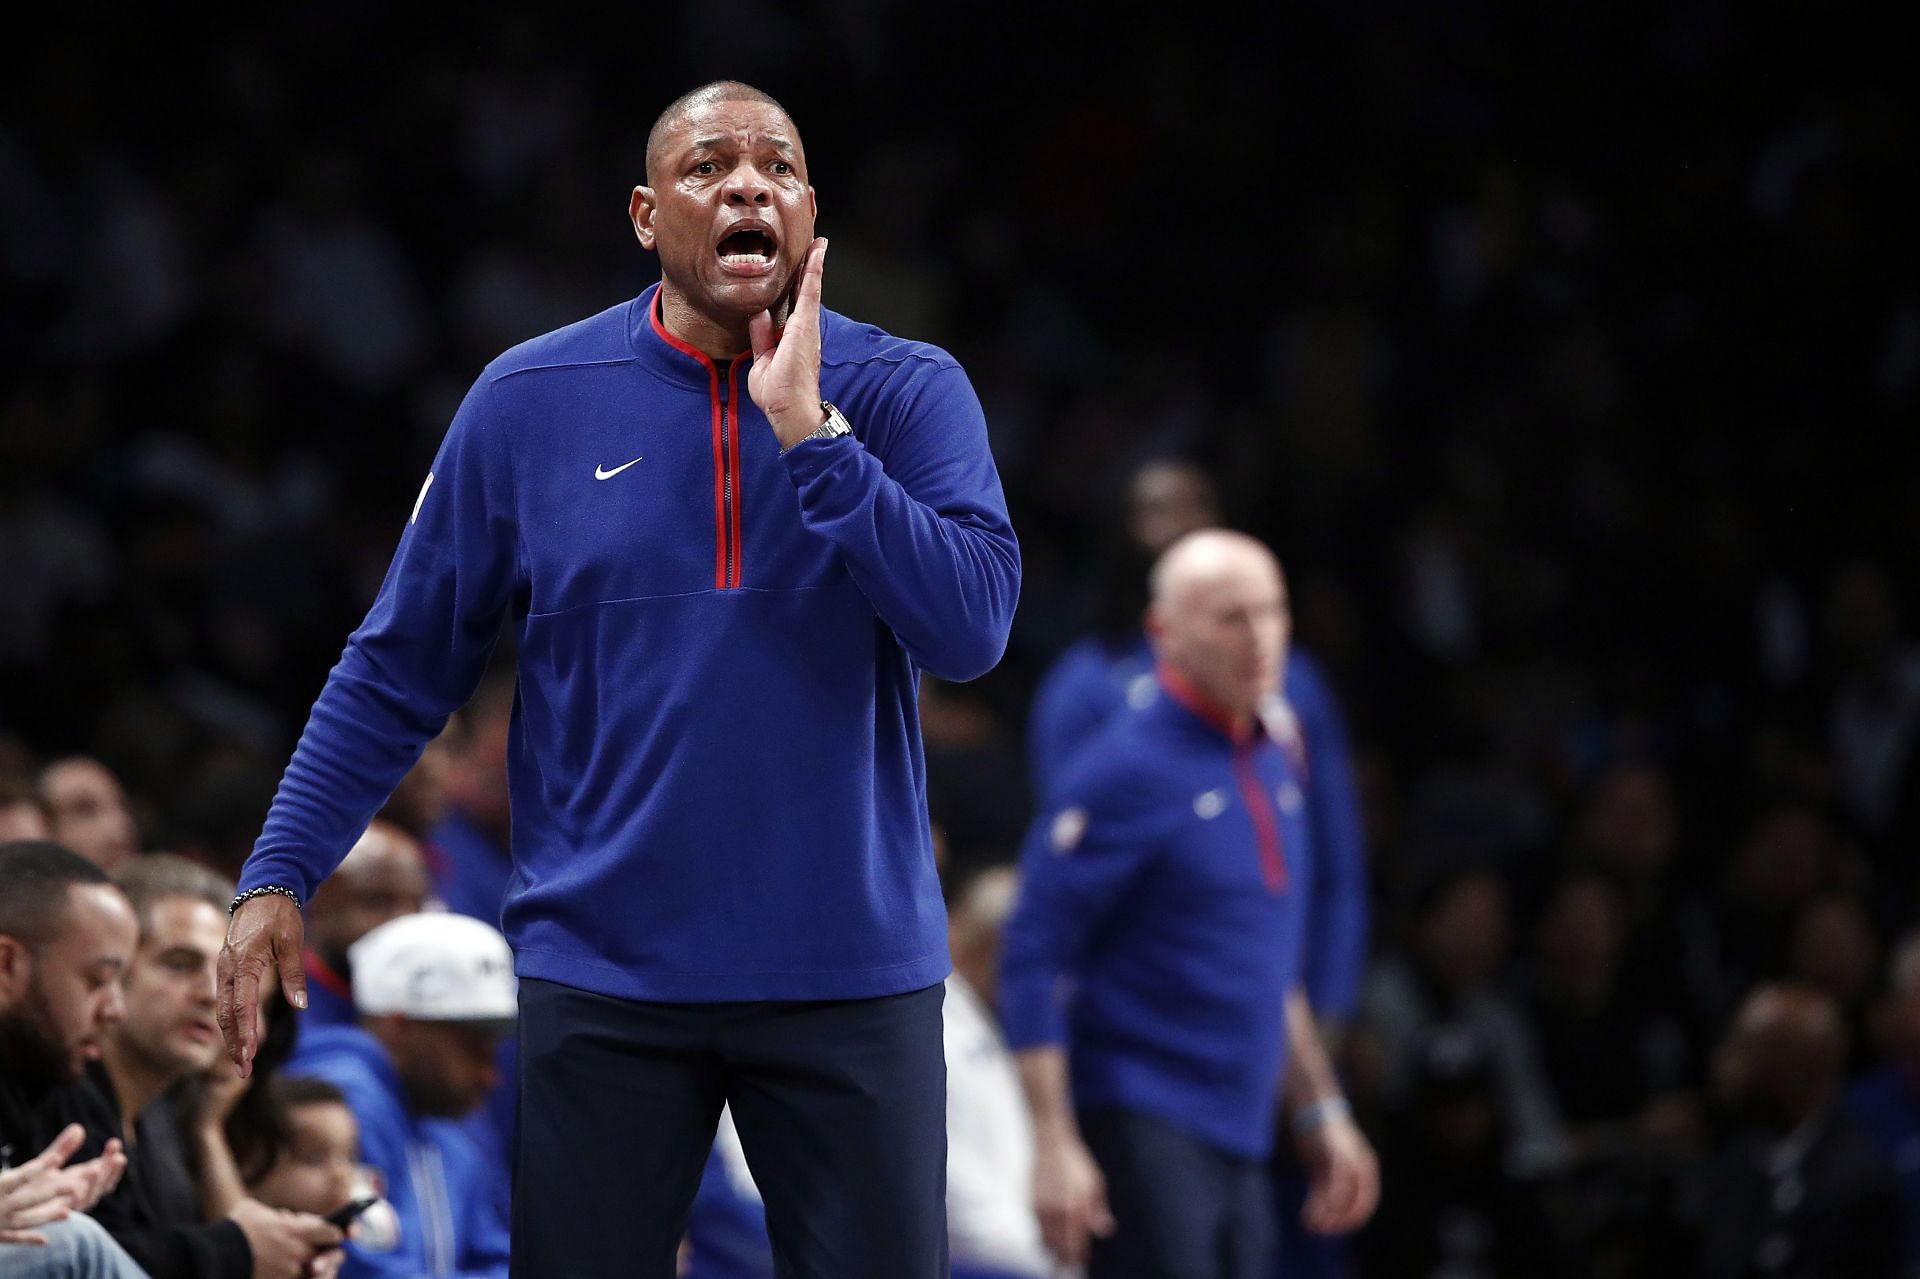 Doc Rivers is a veteran head coach with championship experience